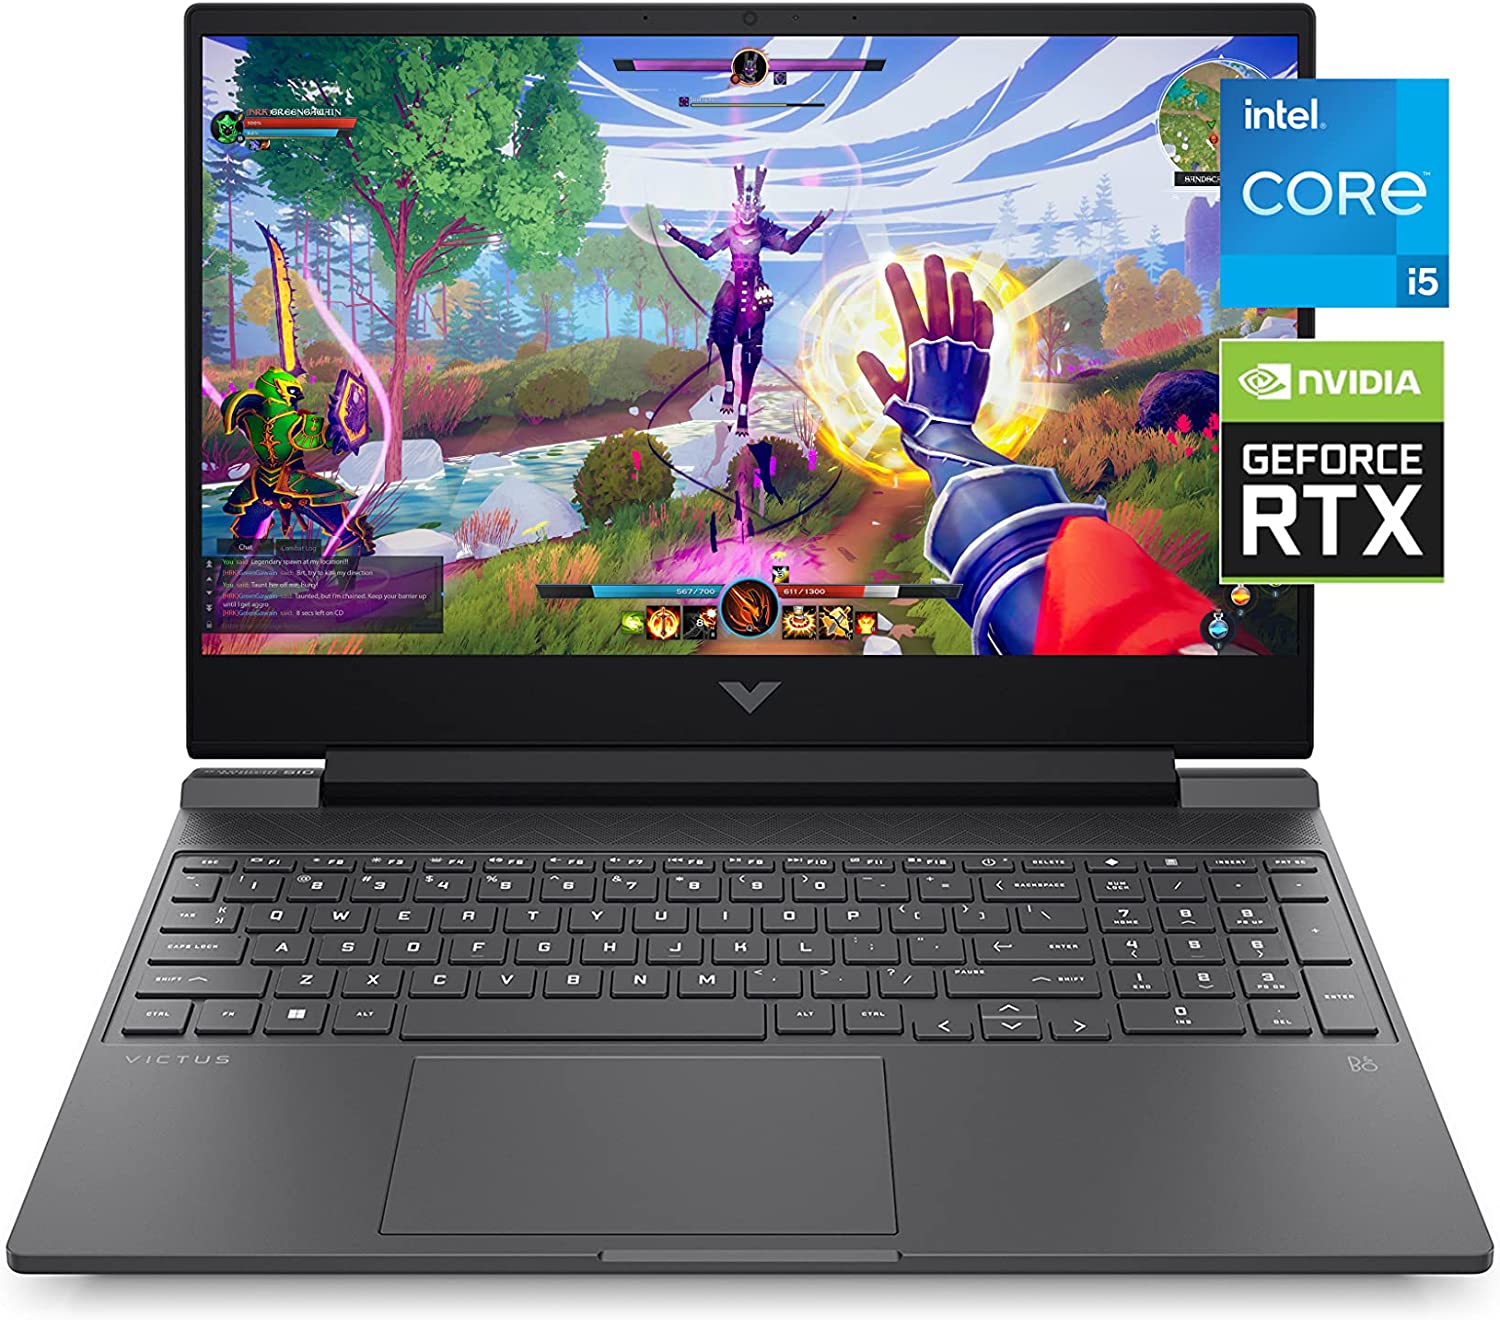 Victus by HP 15 Gaming Laptop, NVIDIA GeForce RTX 3050 – Just $799.99 at Amazon